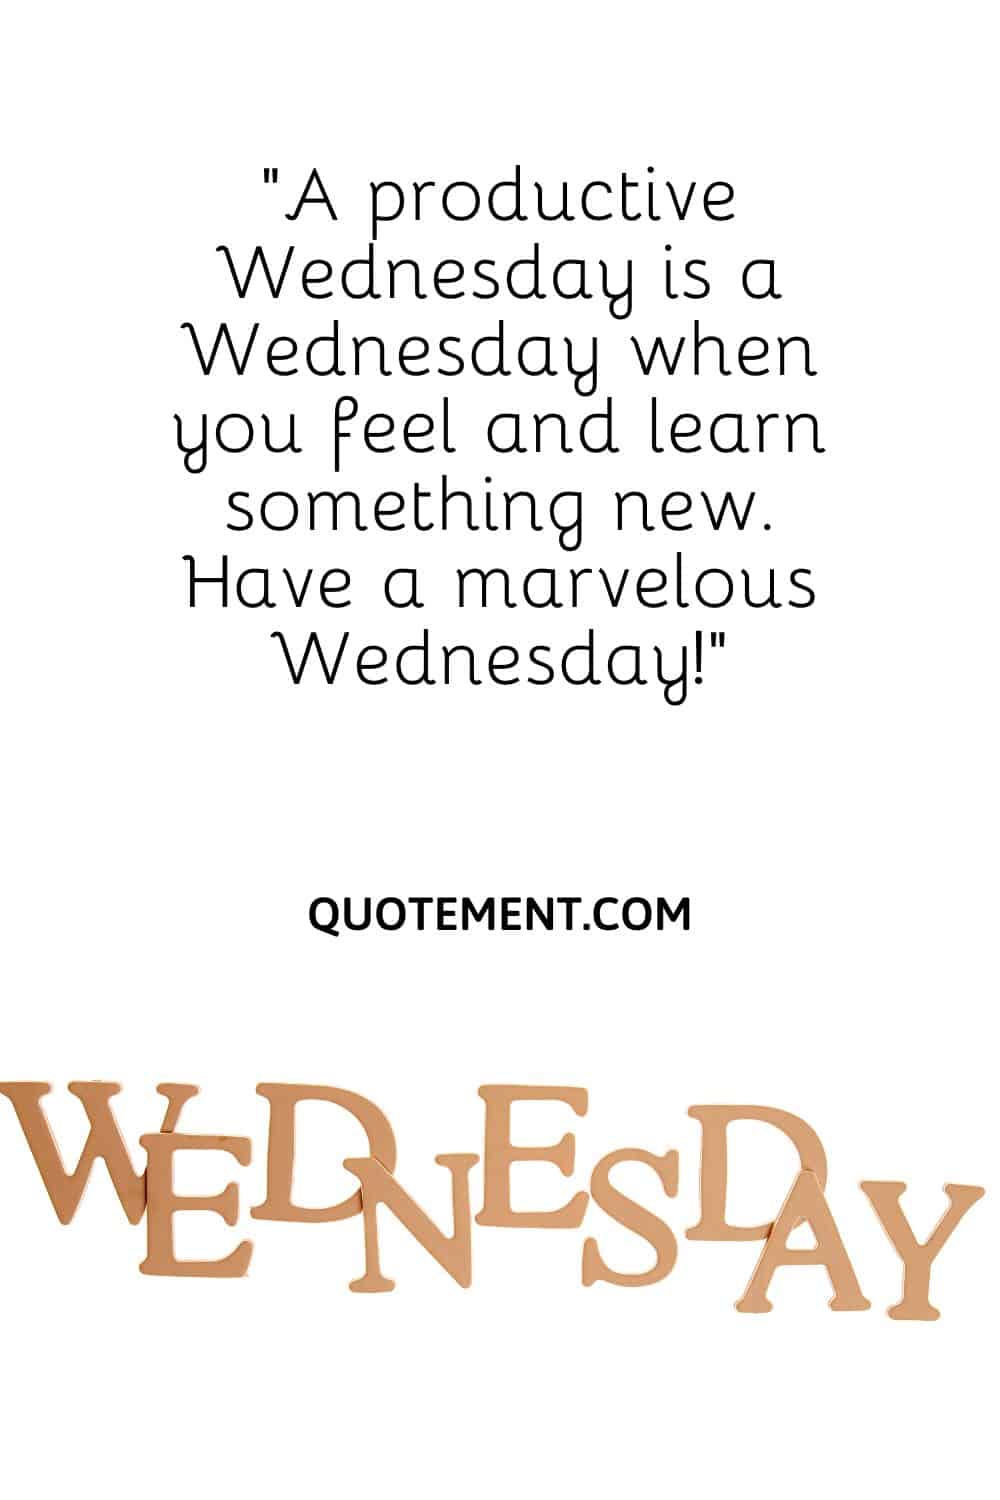 A productive Wednesday is a Wednesday when you feel and learn something new